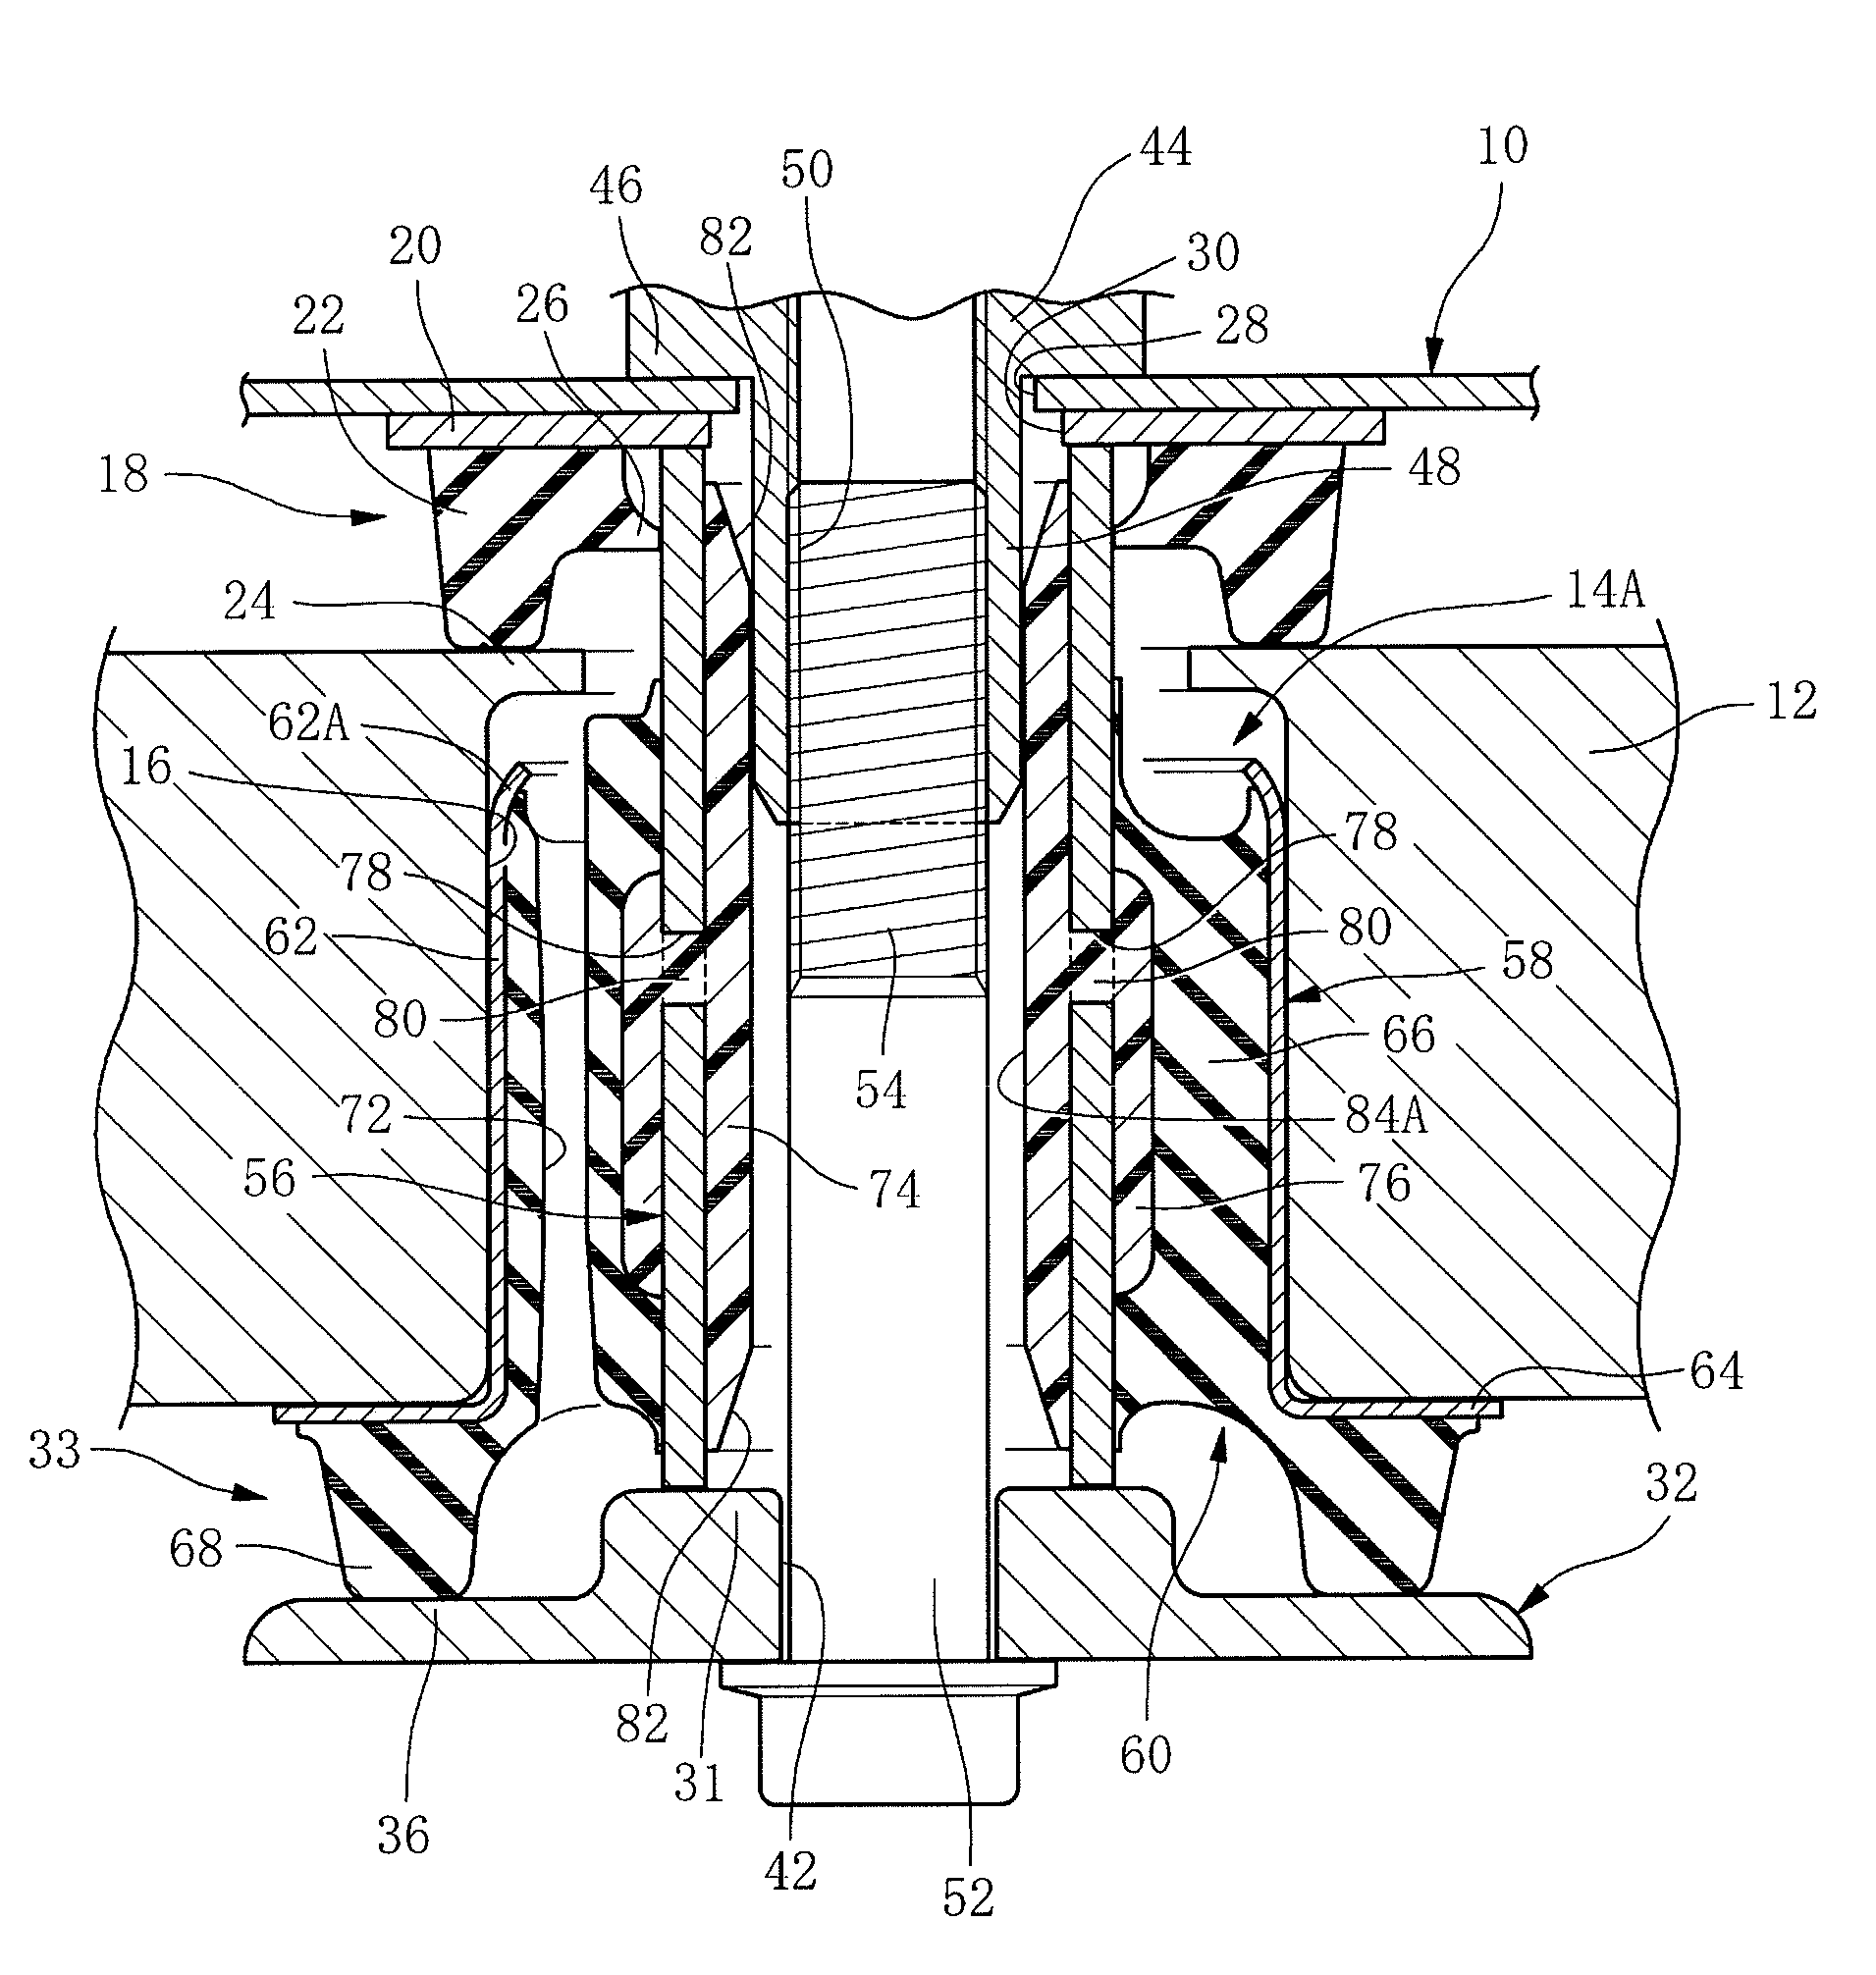 Member mount and assembly structure thereof